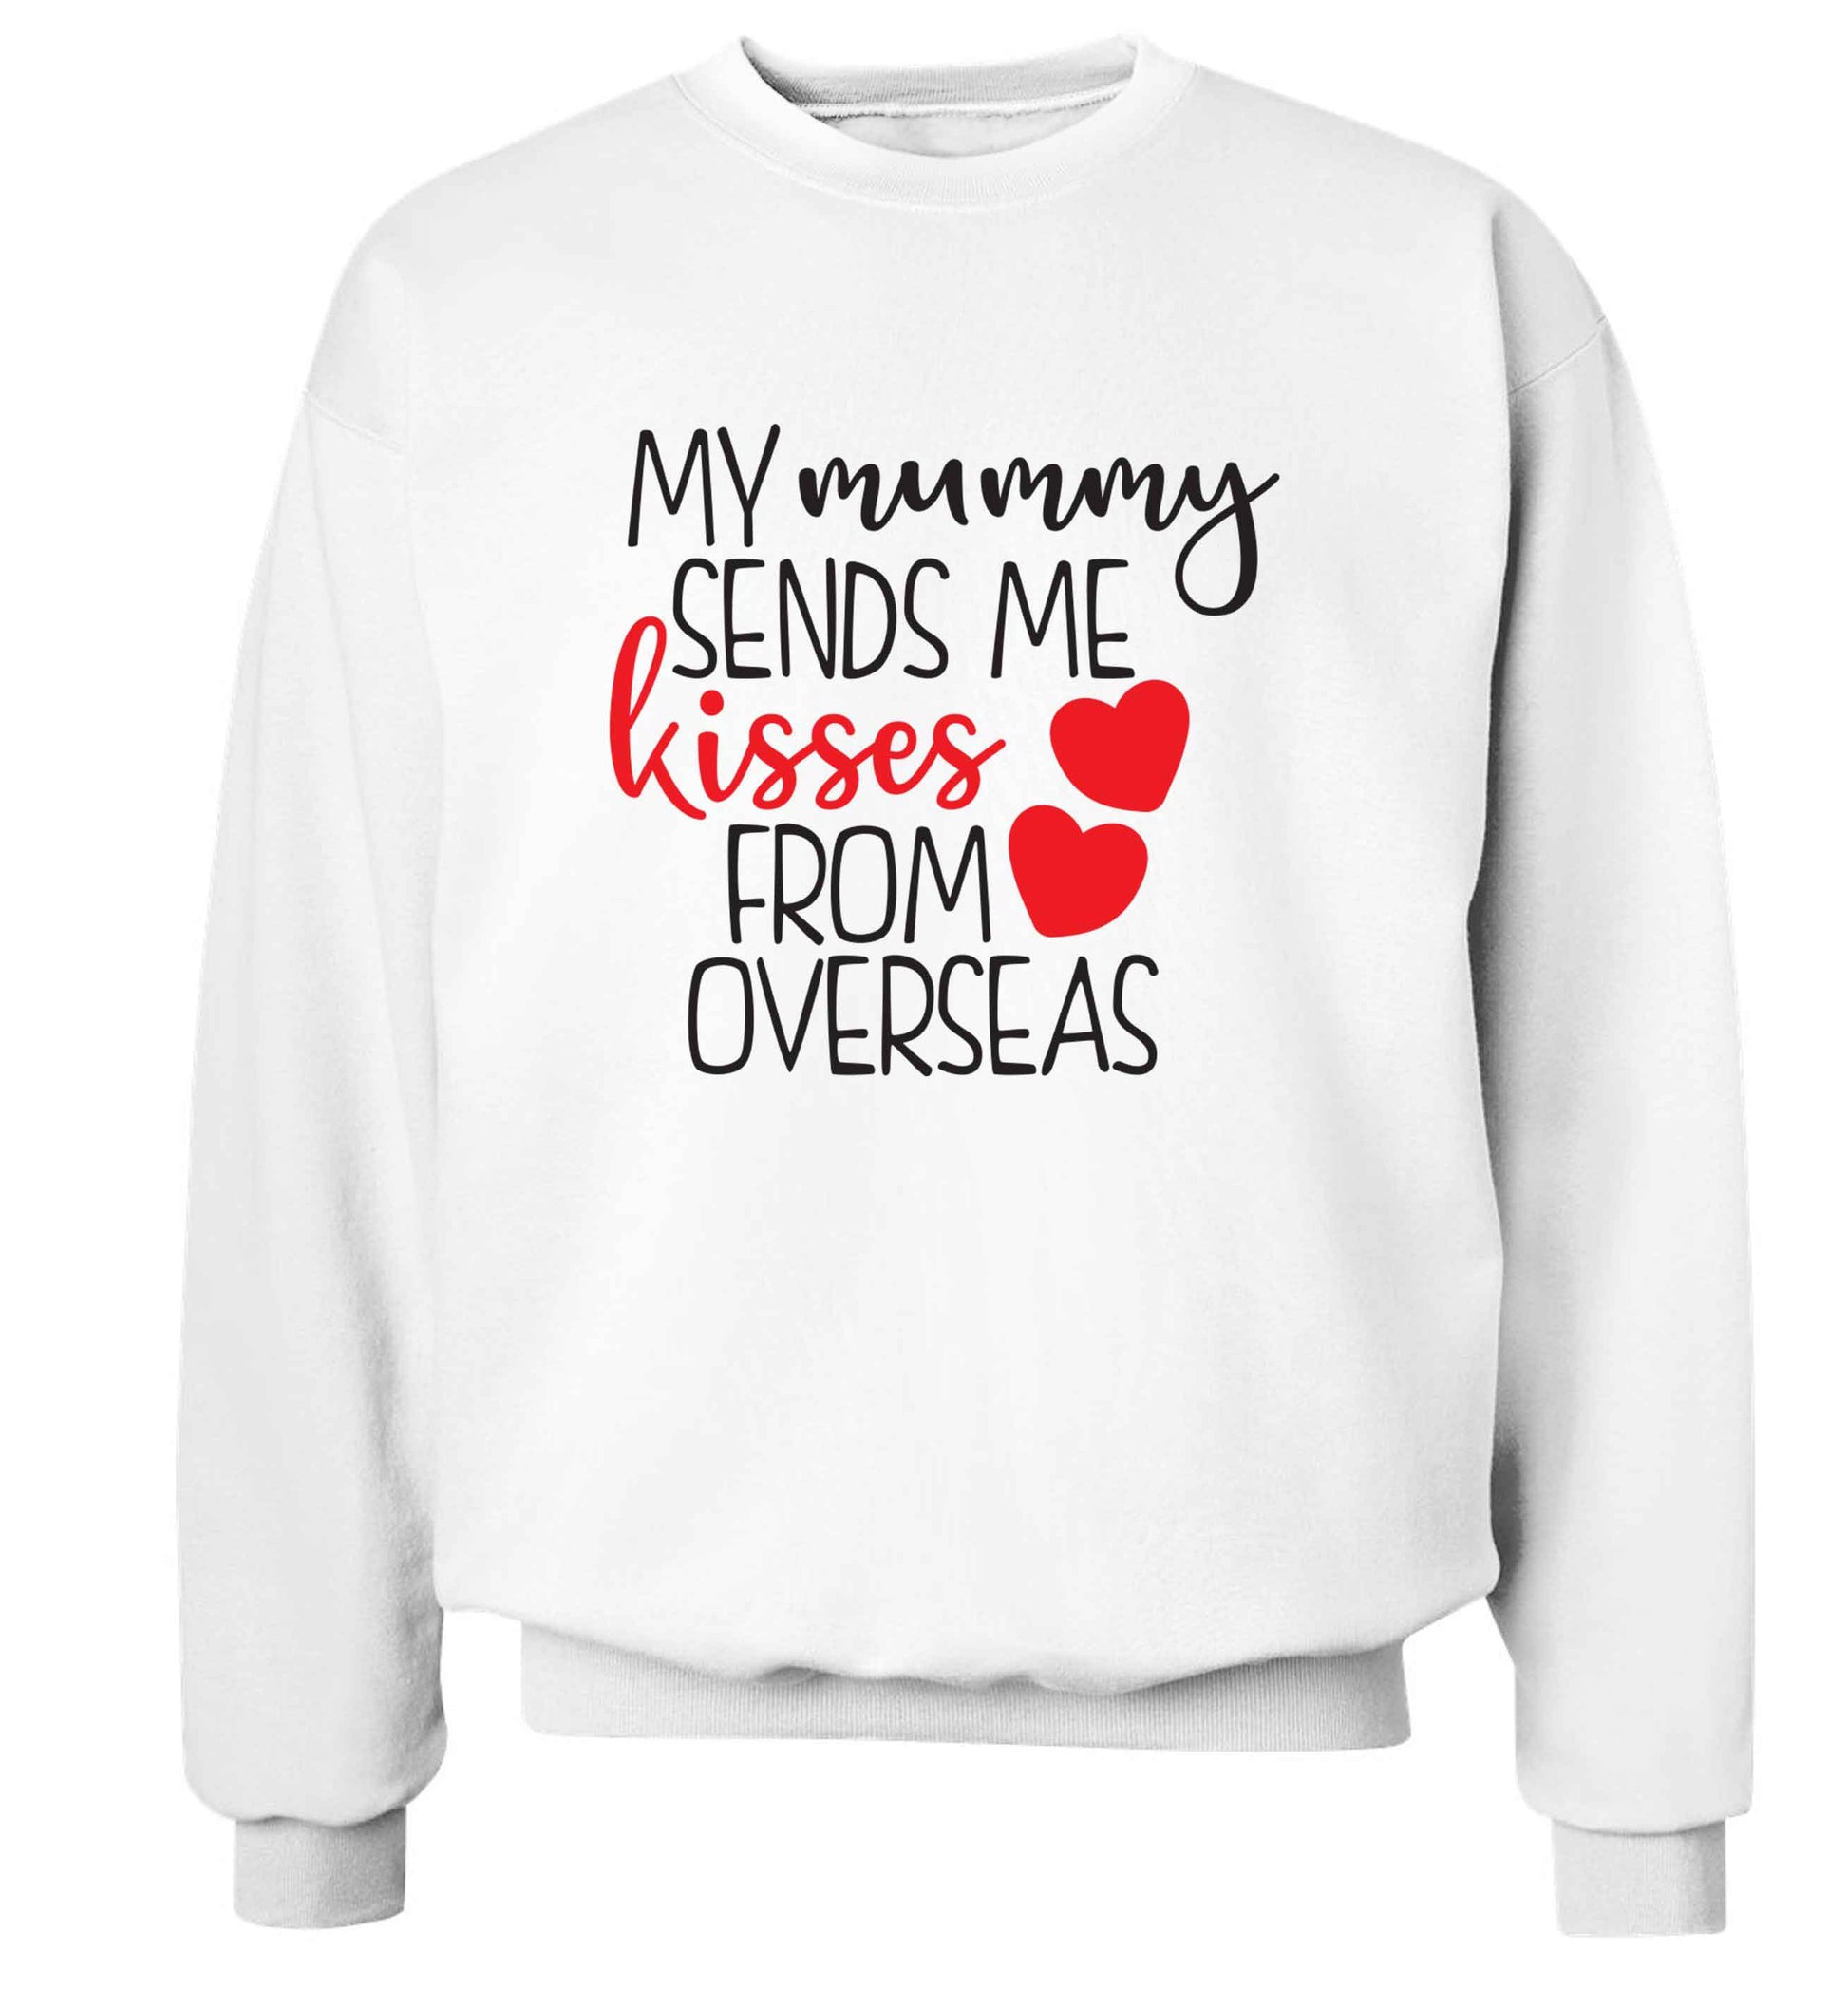 My mummy sends me kisses from overseas adult's unisex white sweater 2XL